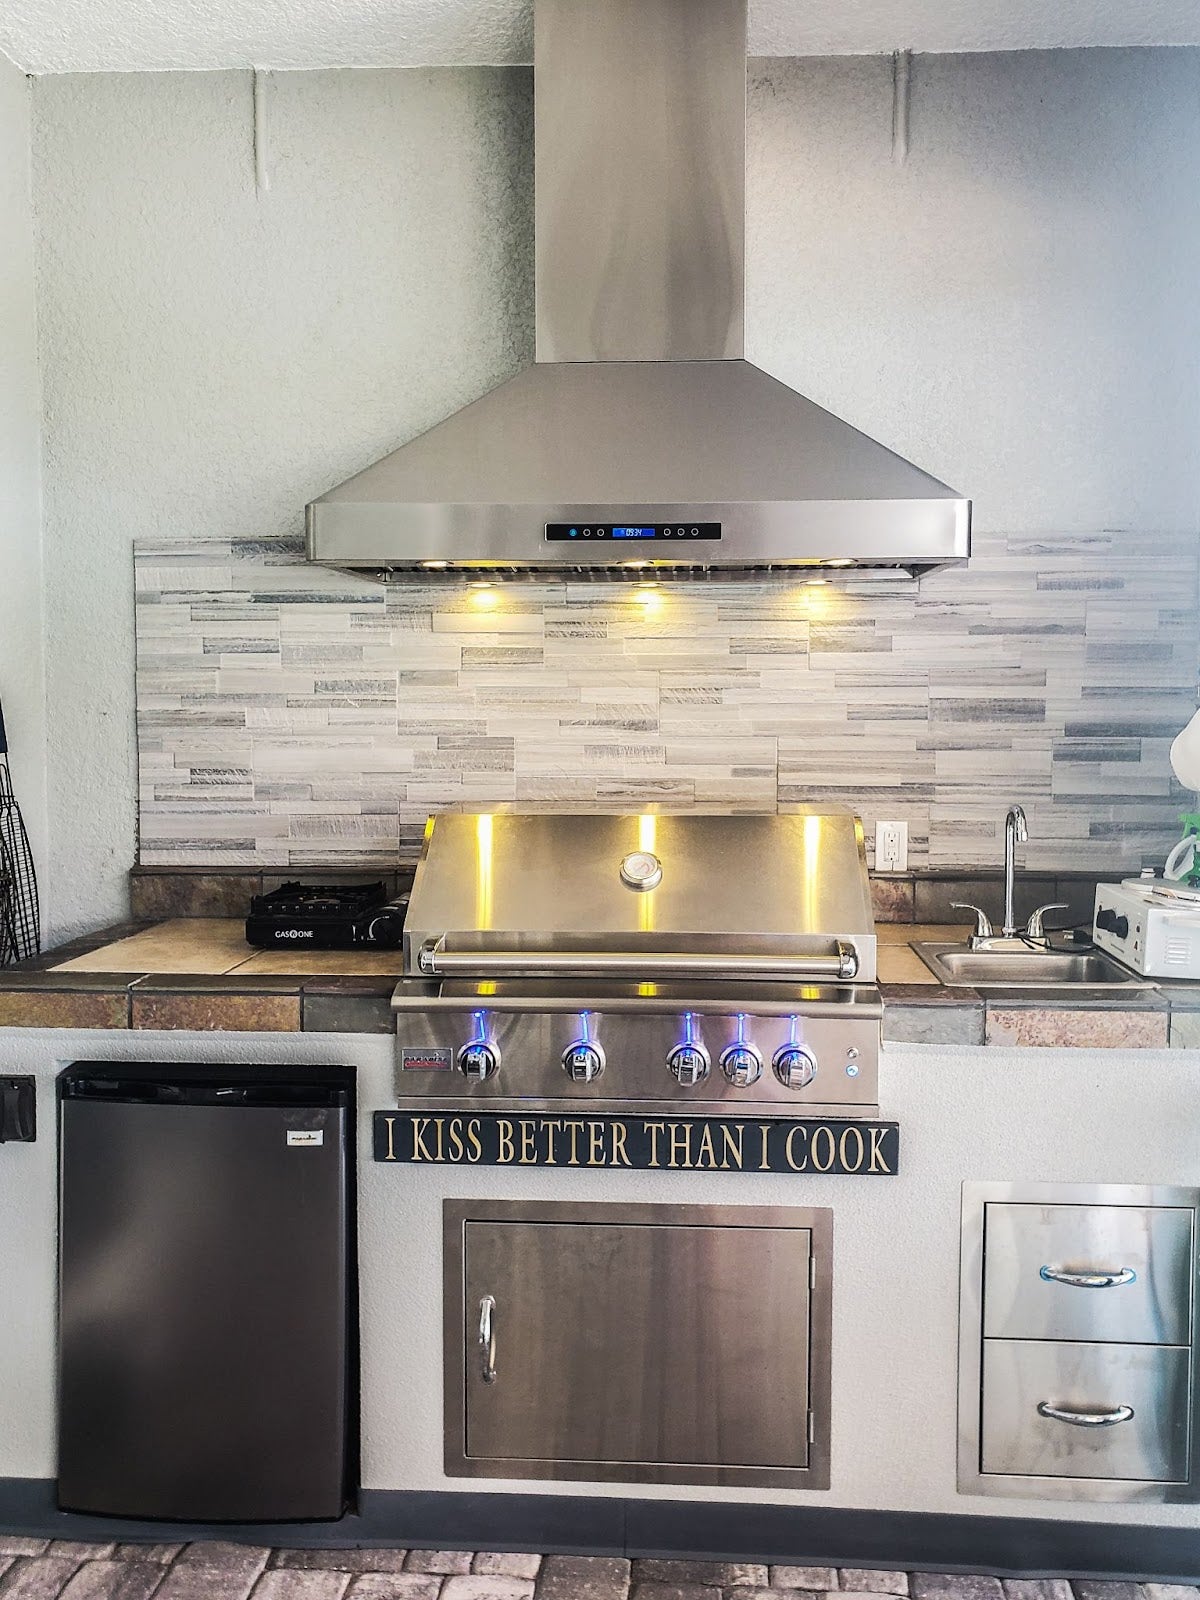 Stylish kitchen setup featuring a Proline range hood, LED-lit grill, and a humorous culinary quote, combining function with a touch of personality - prolinerangehoods.com.